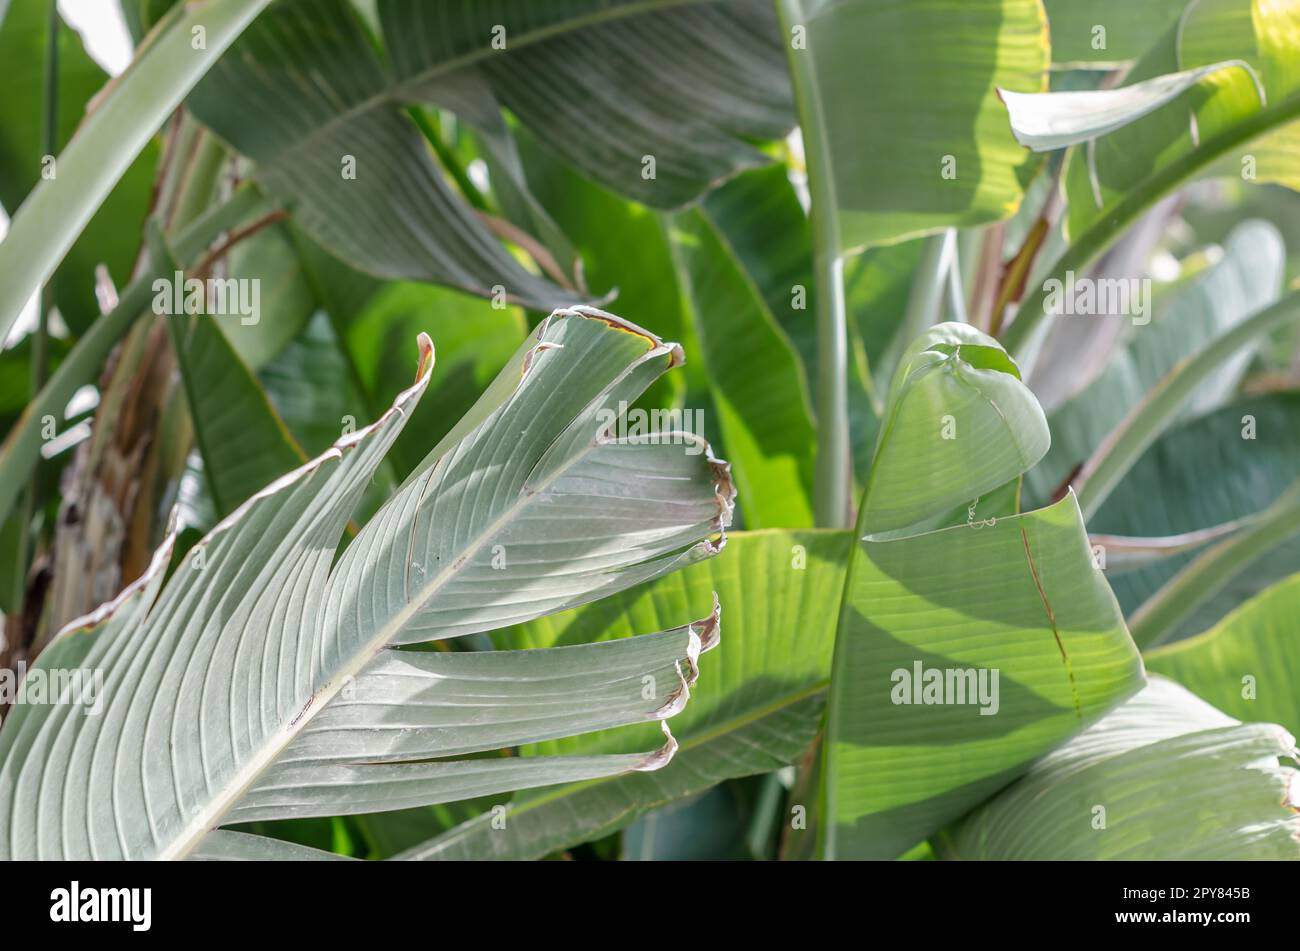 Natural background of tropical plant leaves Stock Photo